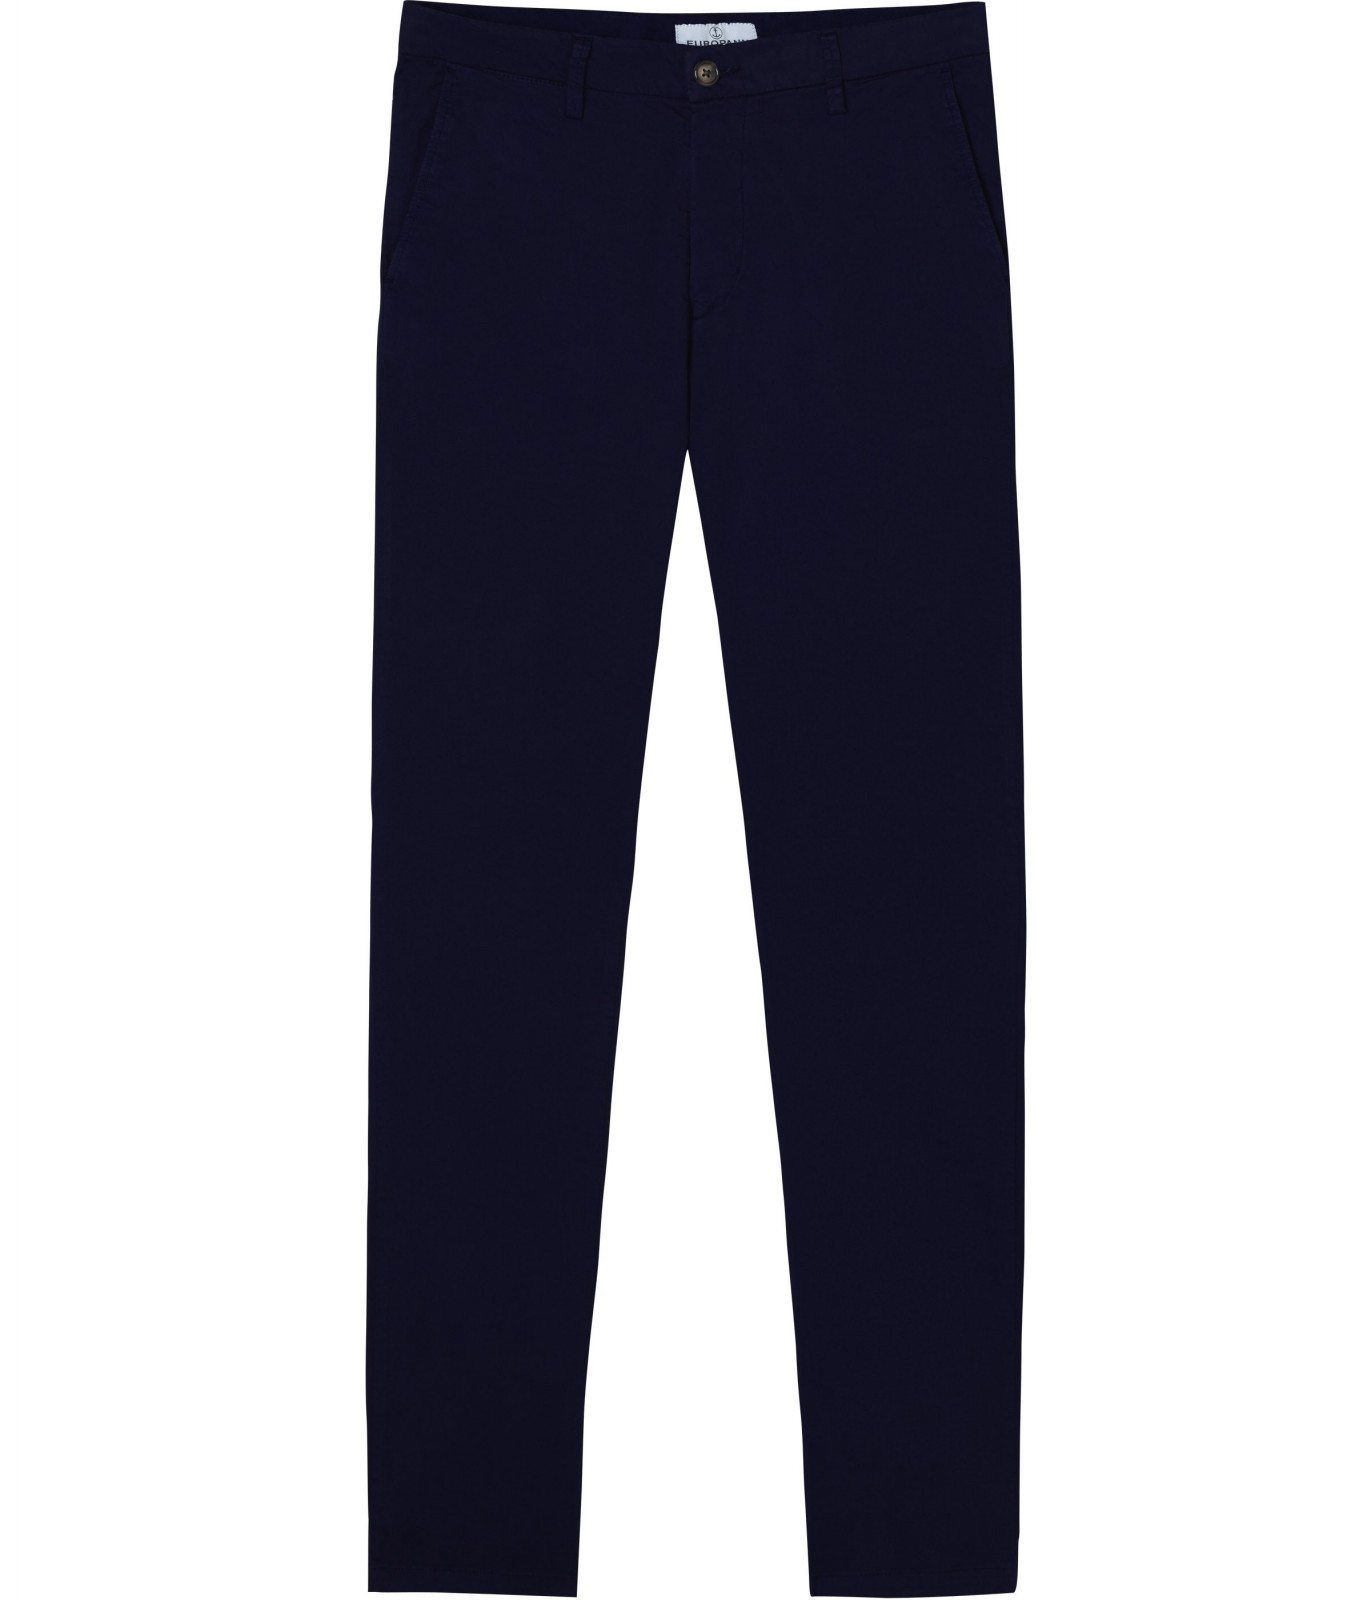 Buy COLOR PLUS Mens Slim Fit Solid Formal Trousers  Shoppers Stop